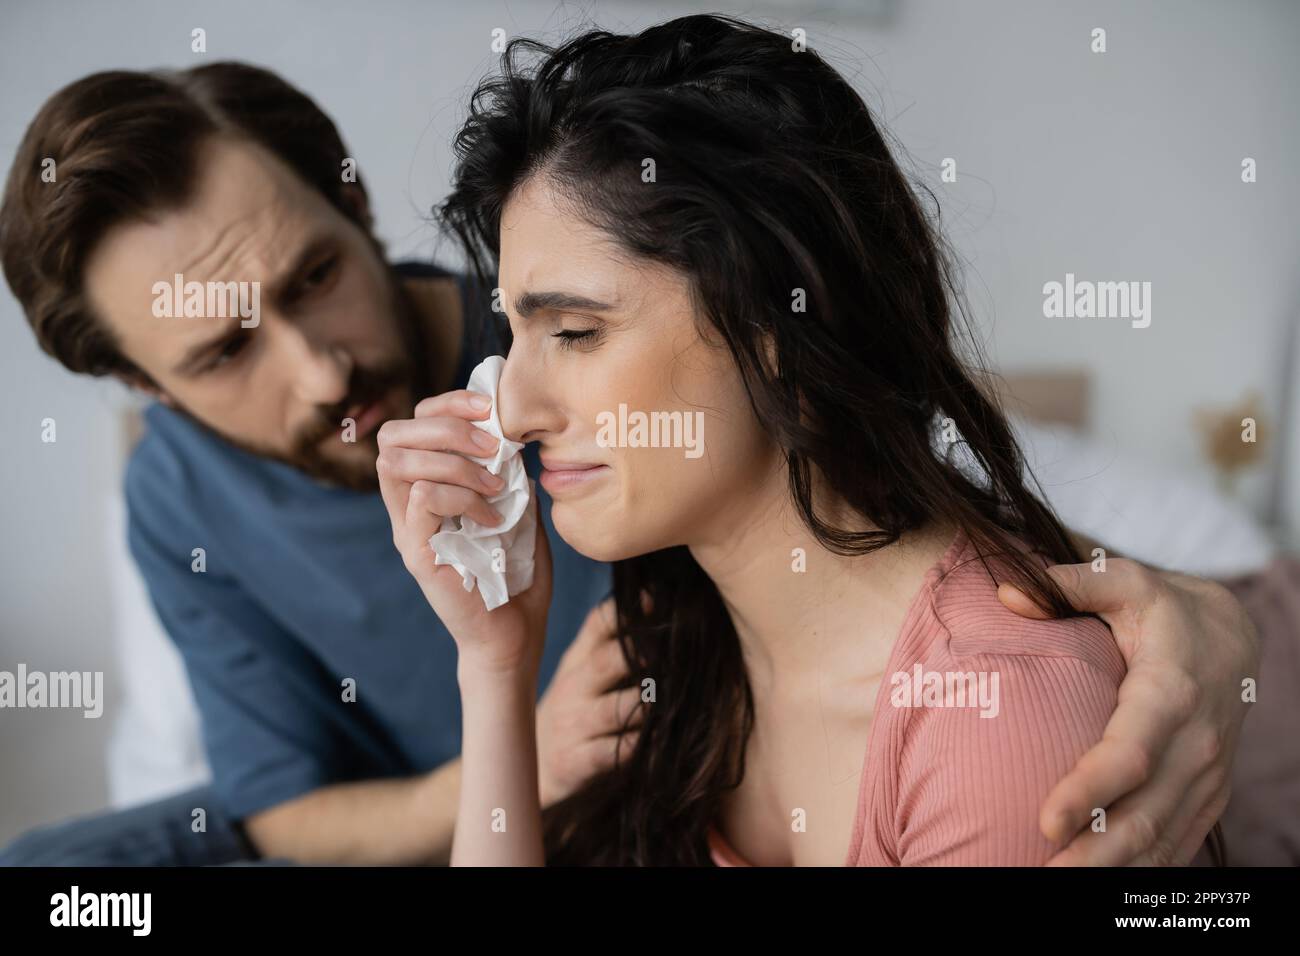 Displeased woman crying near caring blurred boyfriend at home,stock image Stock Photo